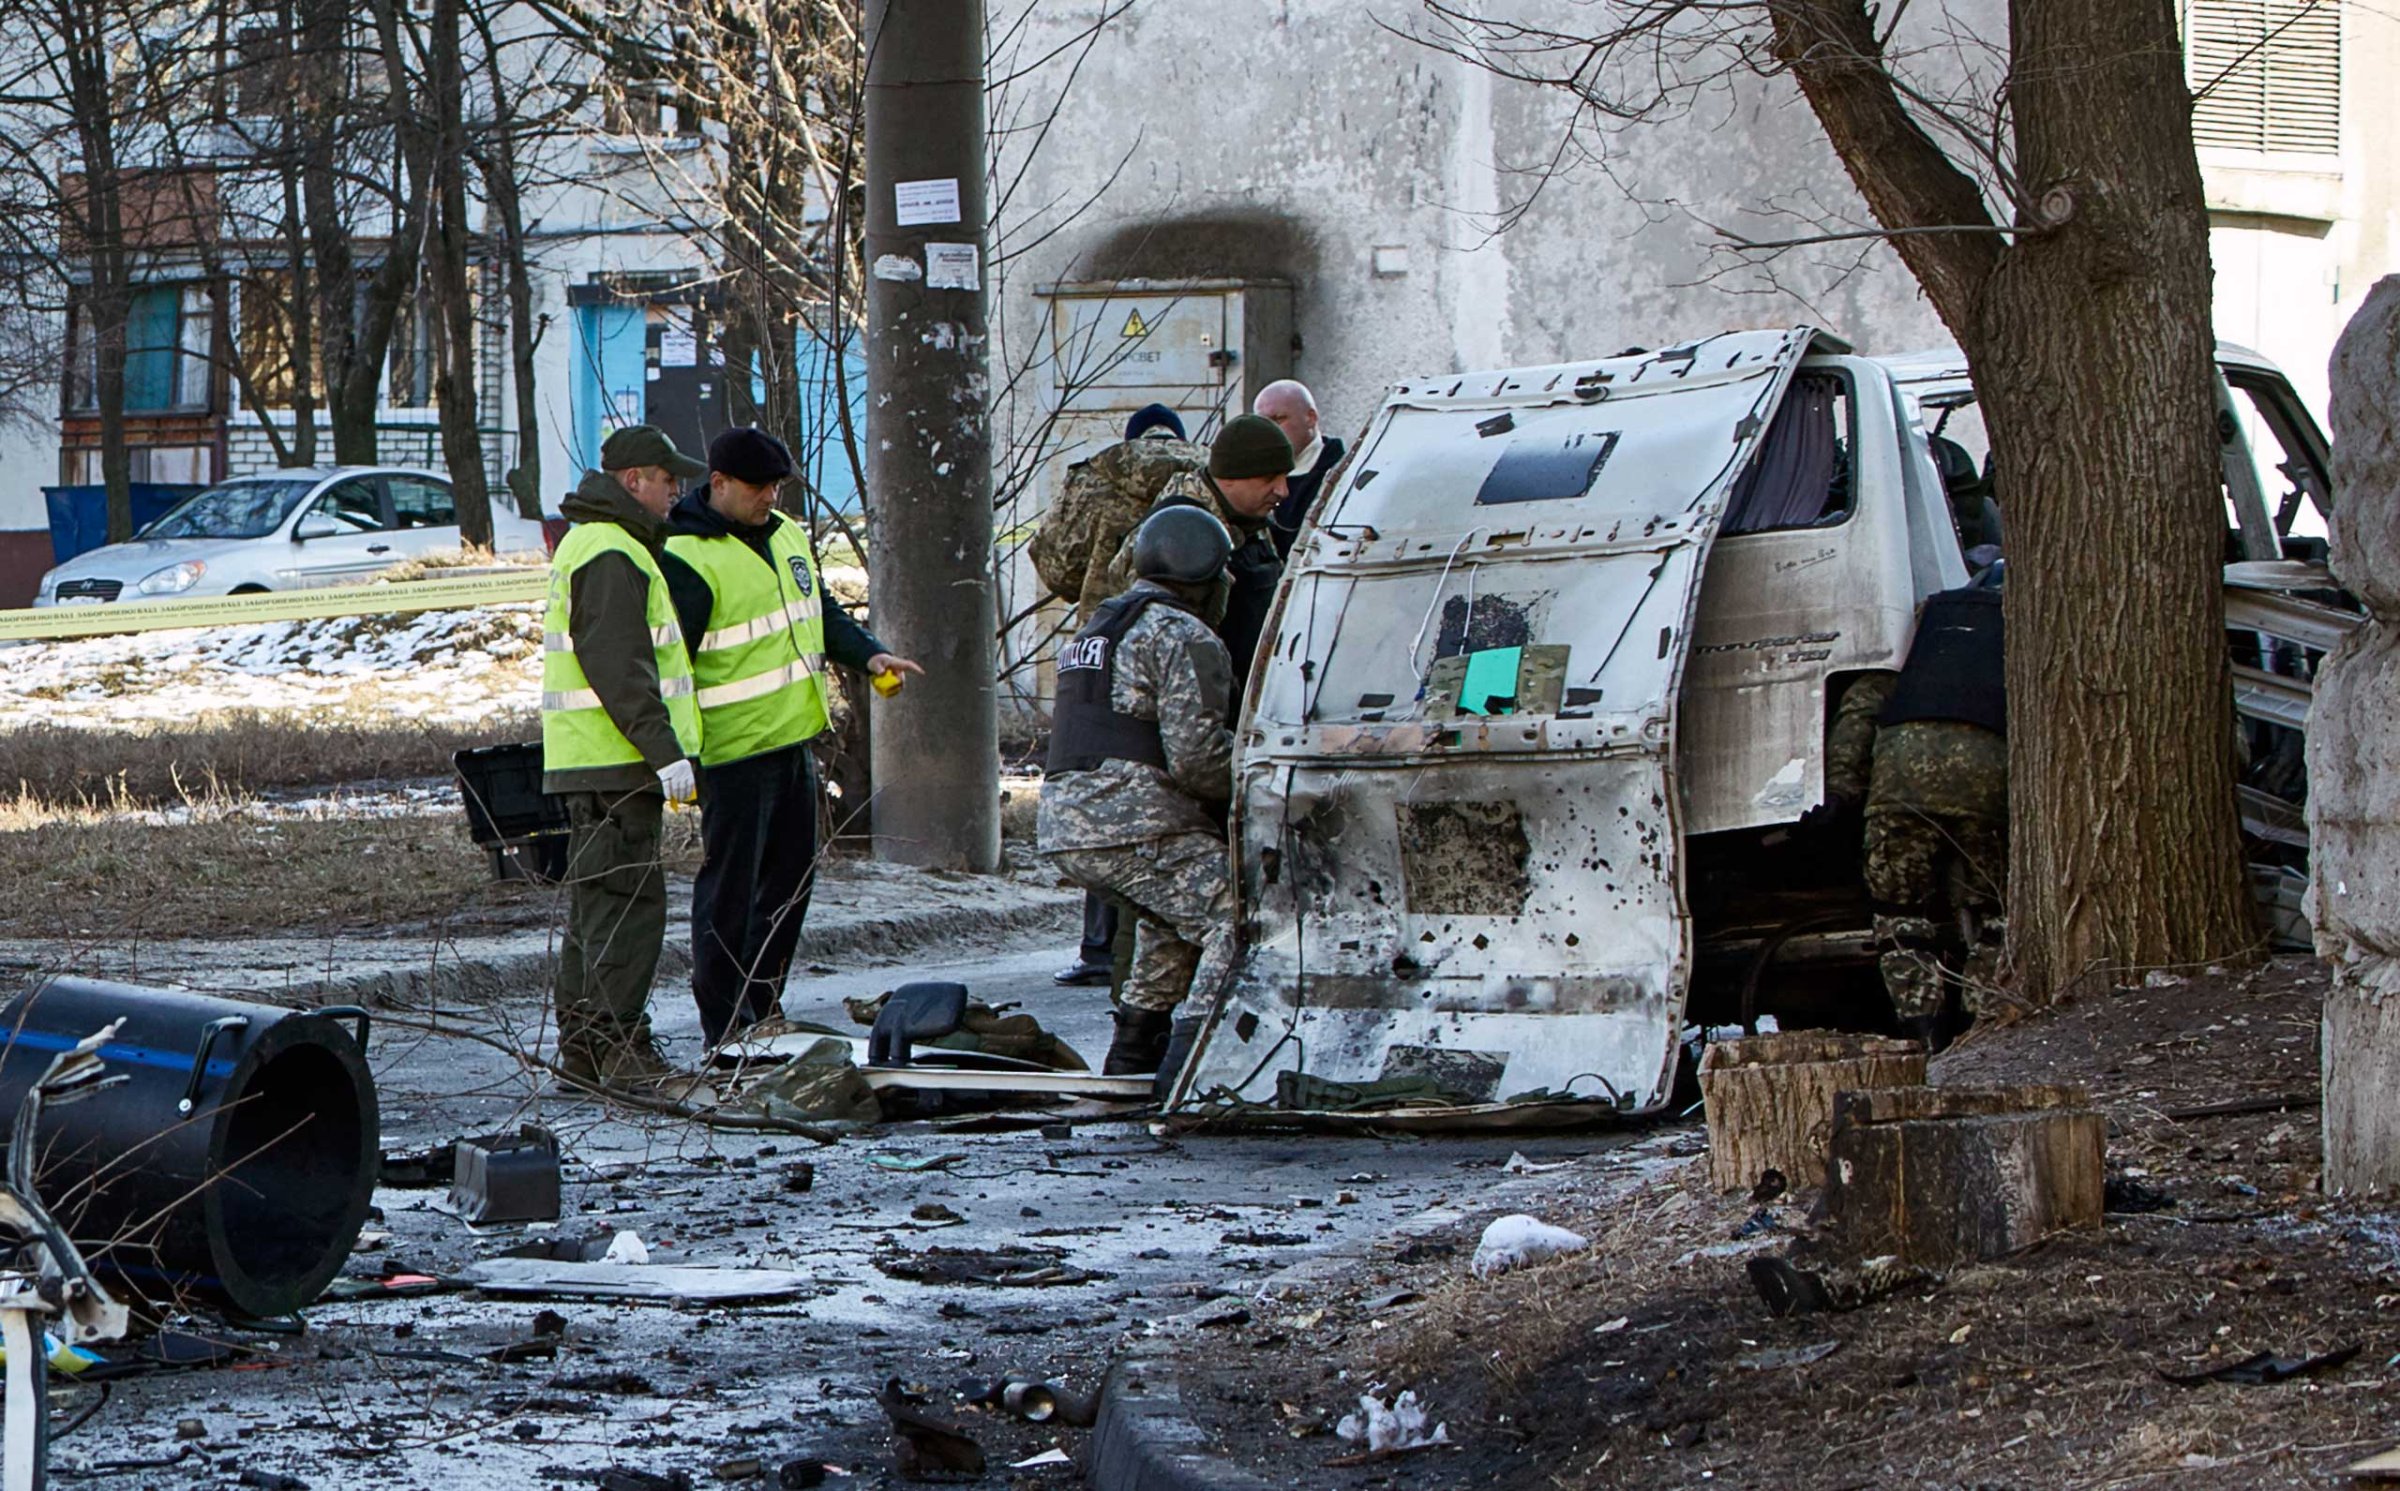 Ukrainian police and forensic experts examine the wreckage of a mini-bus after explosion, in Kharkov, March 6, 2015.